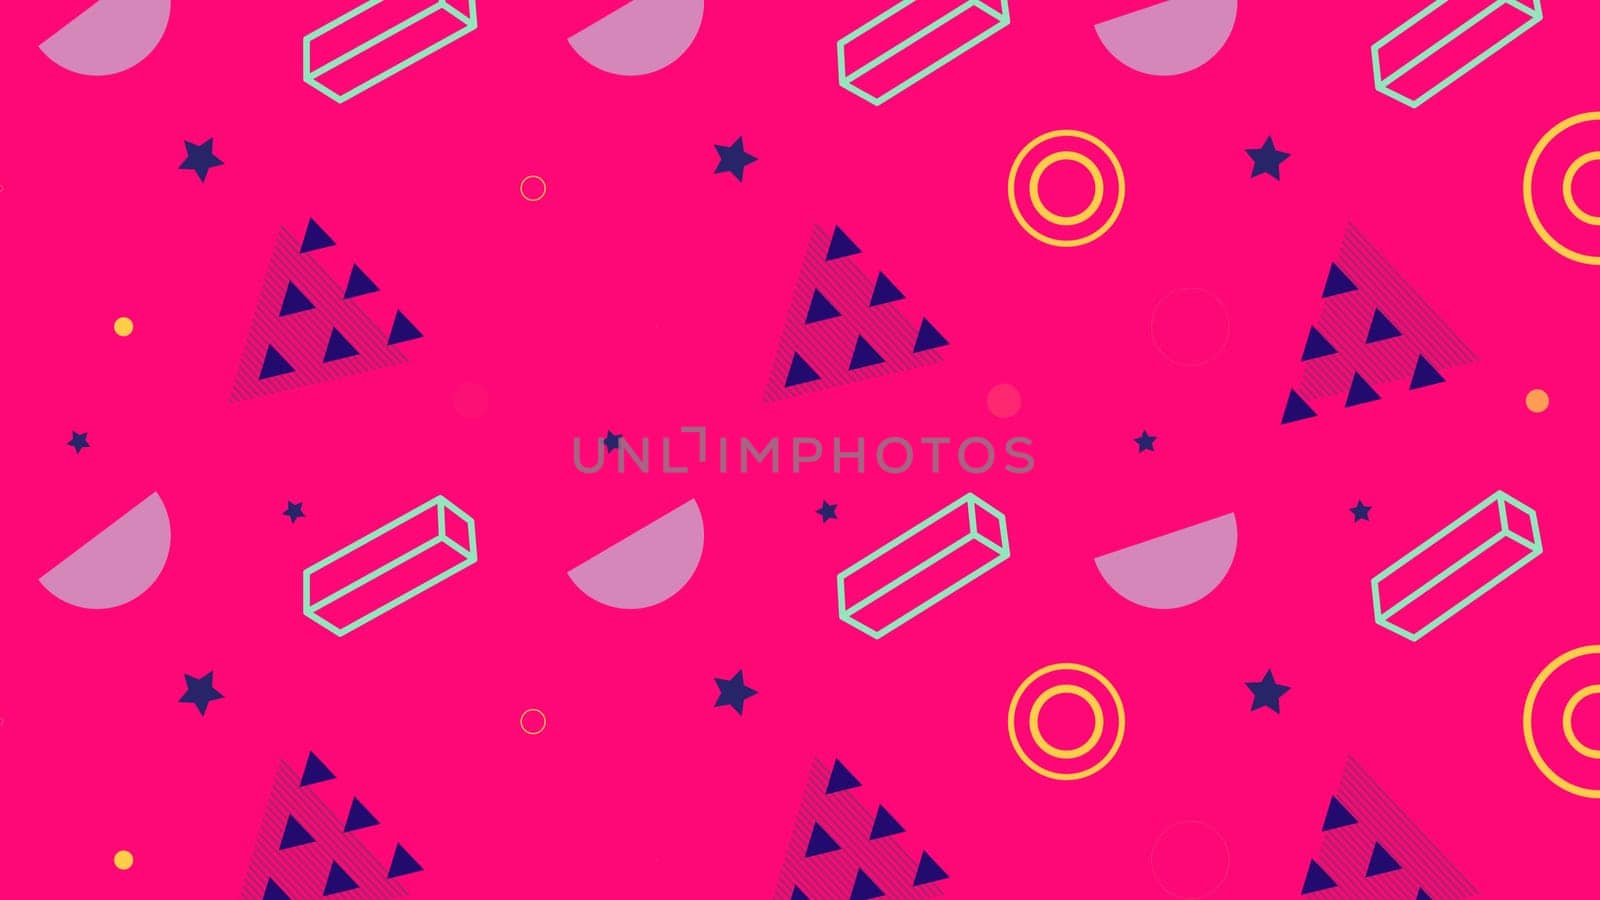 Abstract seamless pattern on pink background. Colorful doodles or scribbles. High quality